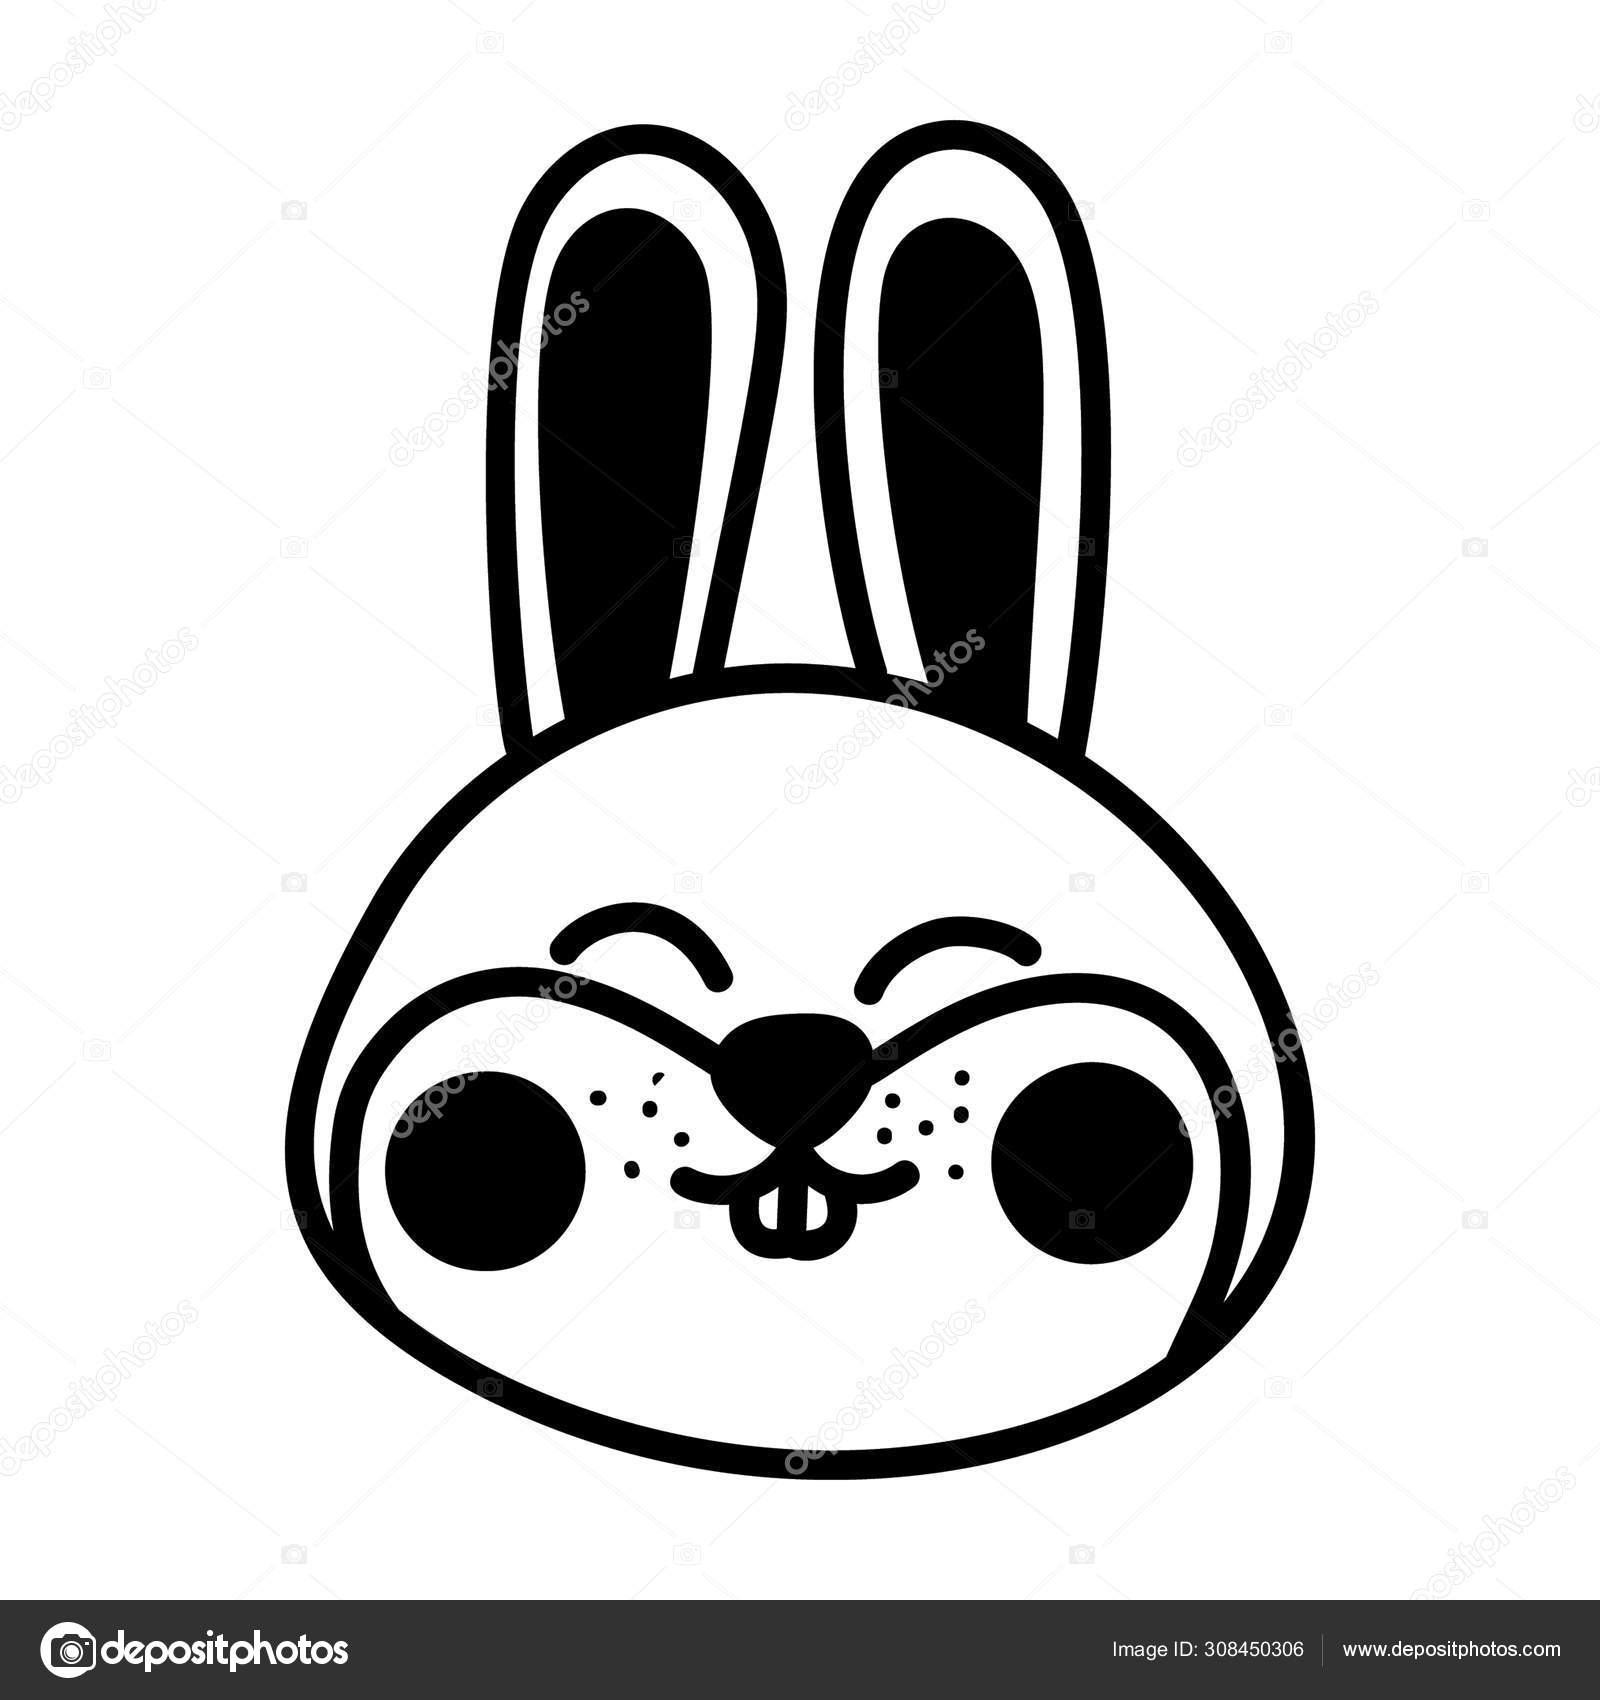 Cute Bunny Face Drawing Isolated White Background Vector Image By C Vectorspoint Vector Stock 308450306